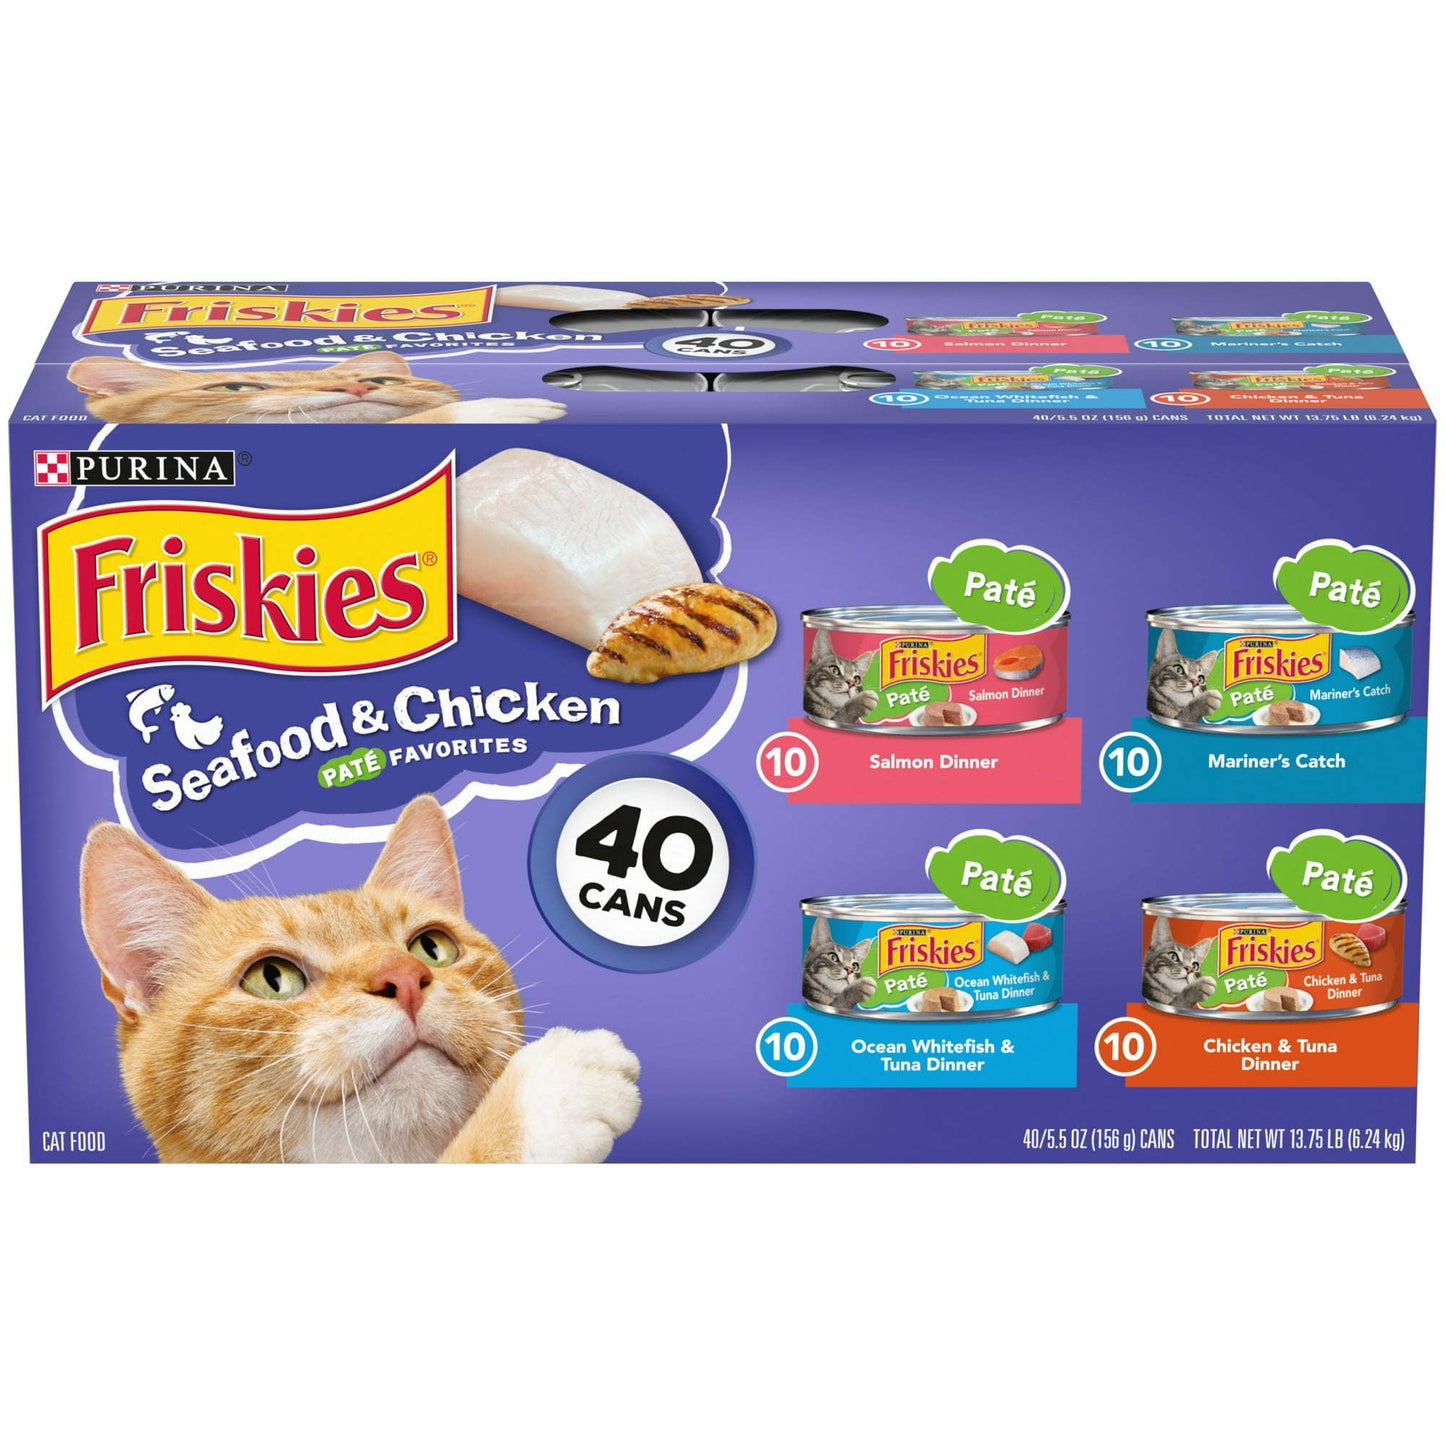 Purina Friskies Seafood and Chicken Wet Cat Food Variety Pack 5.5 oz Cans (40 Pack)